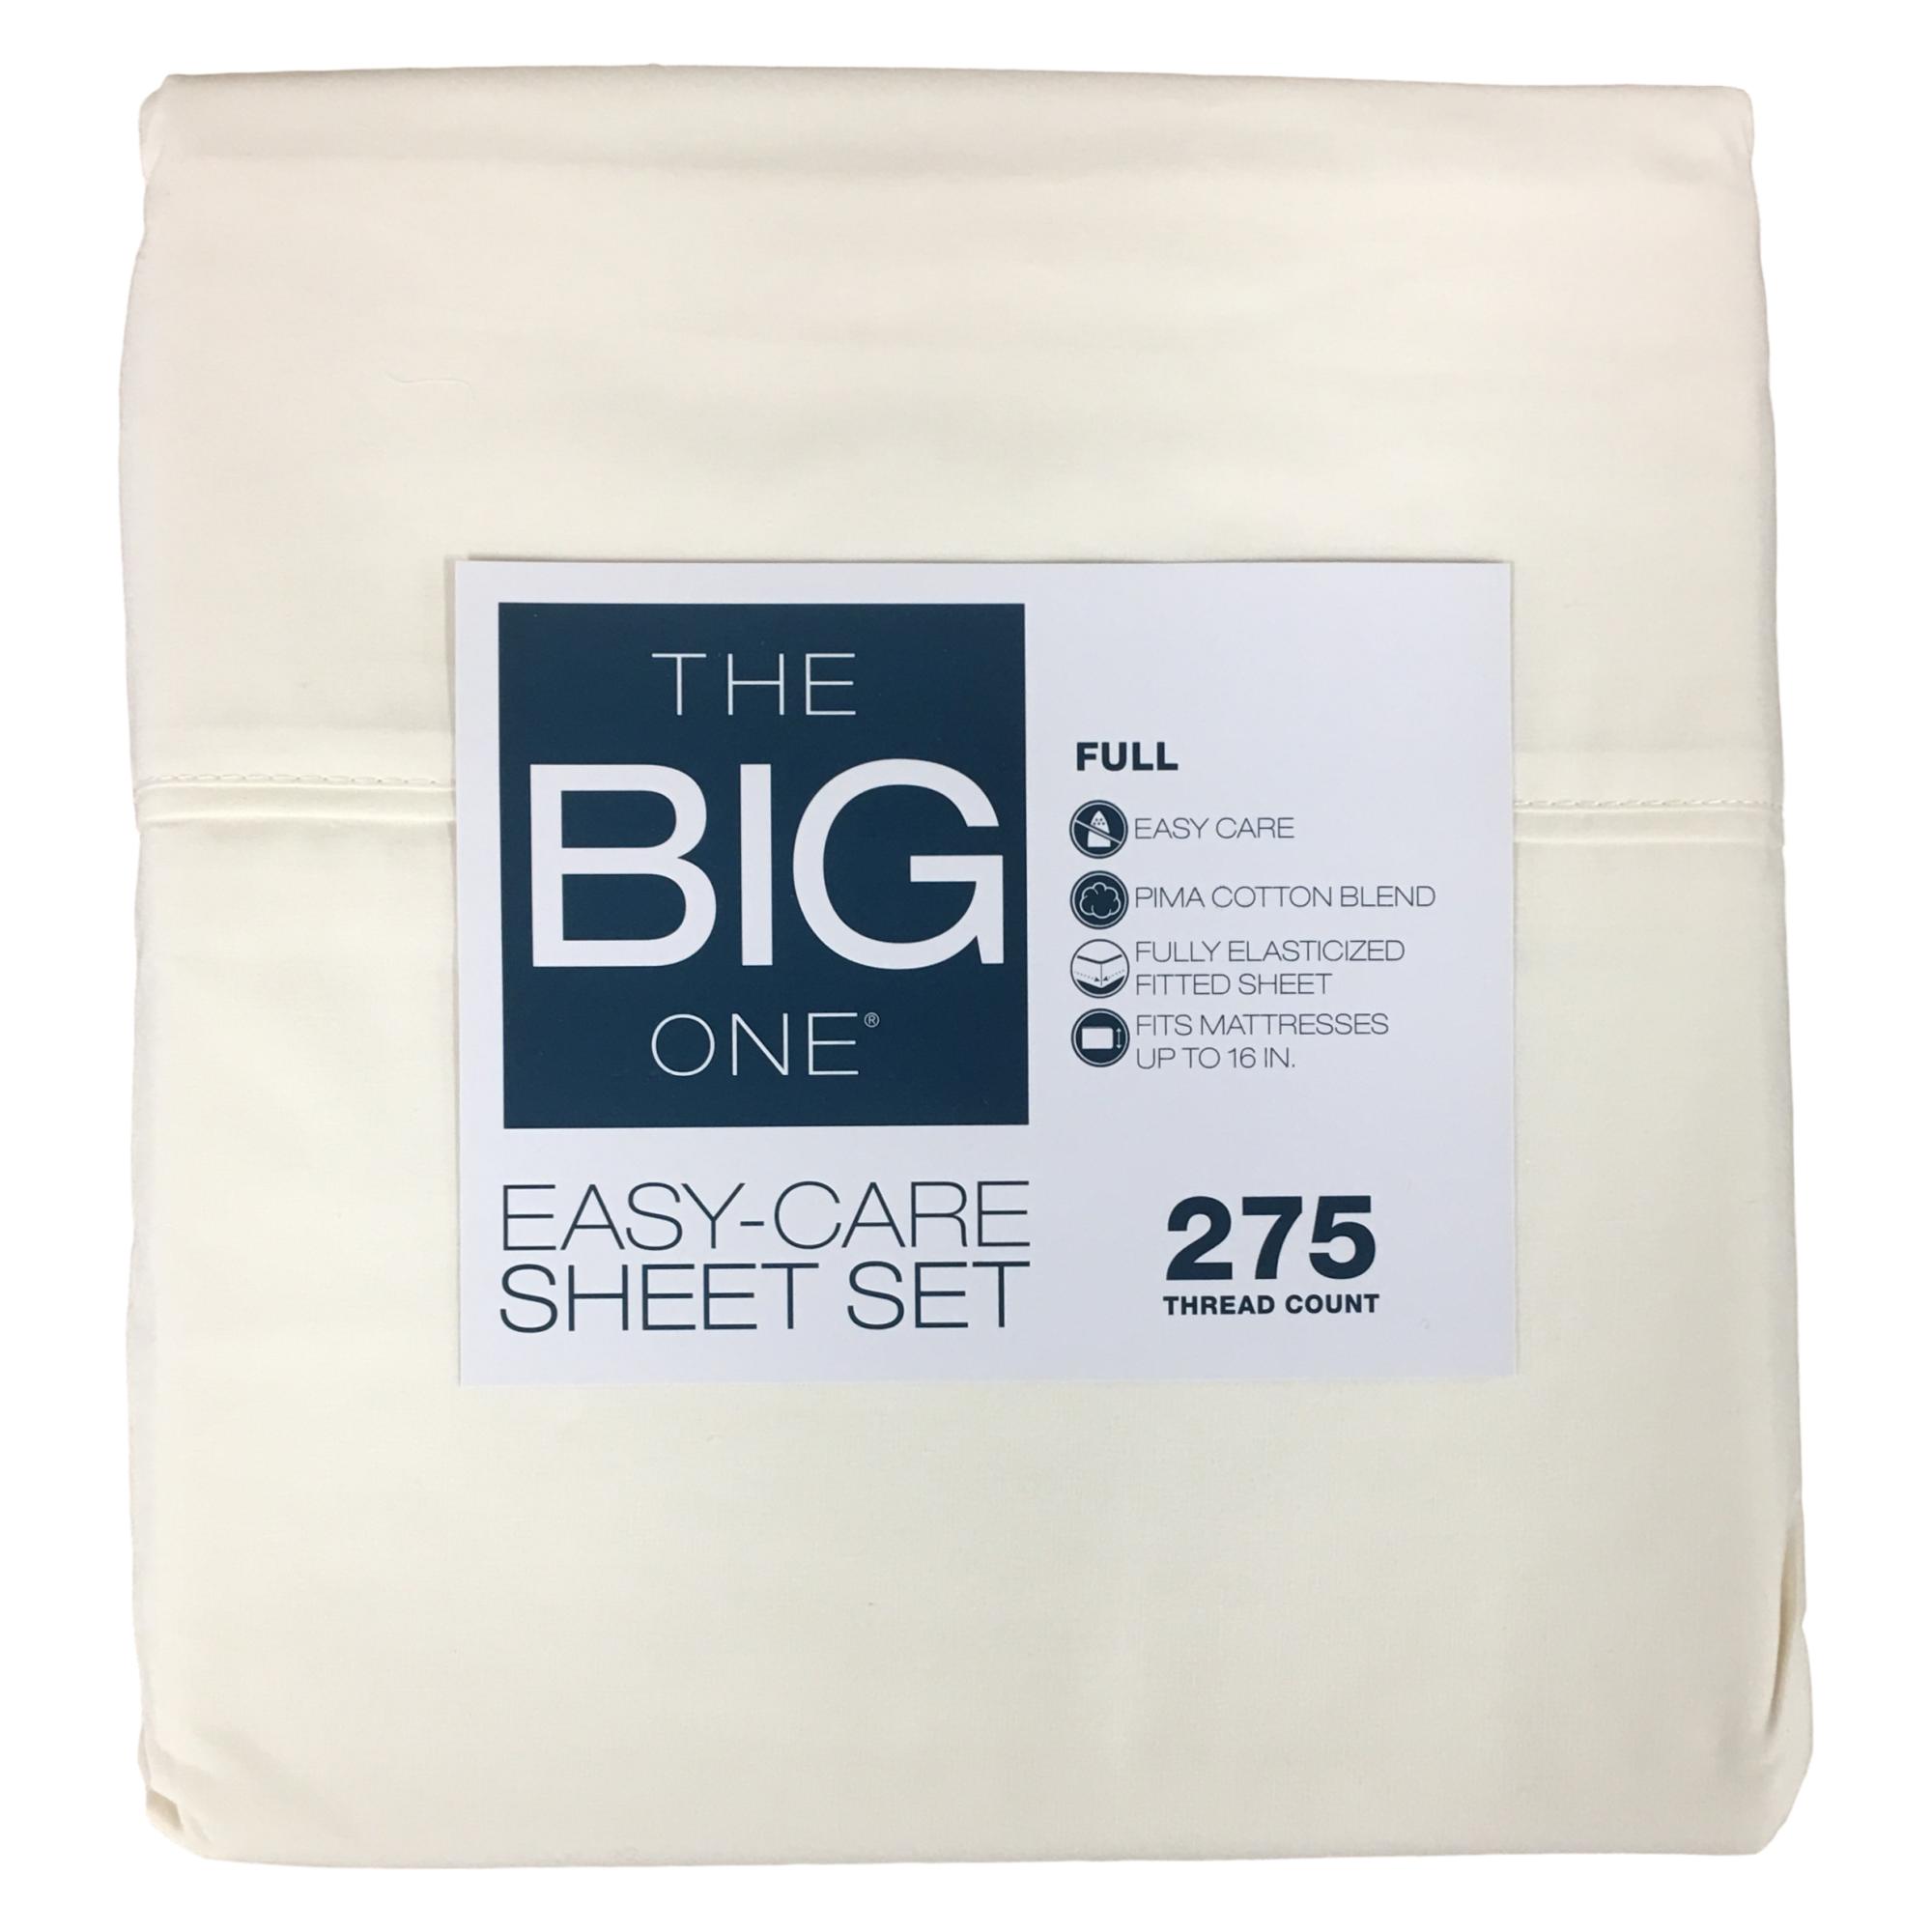 The Big One Ivory Cream Cotton Rich Sheet Set, 275 Thread Full Bed Sheets - image 2 of 2